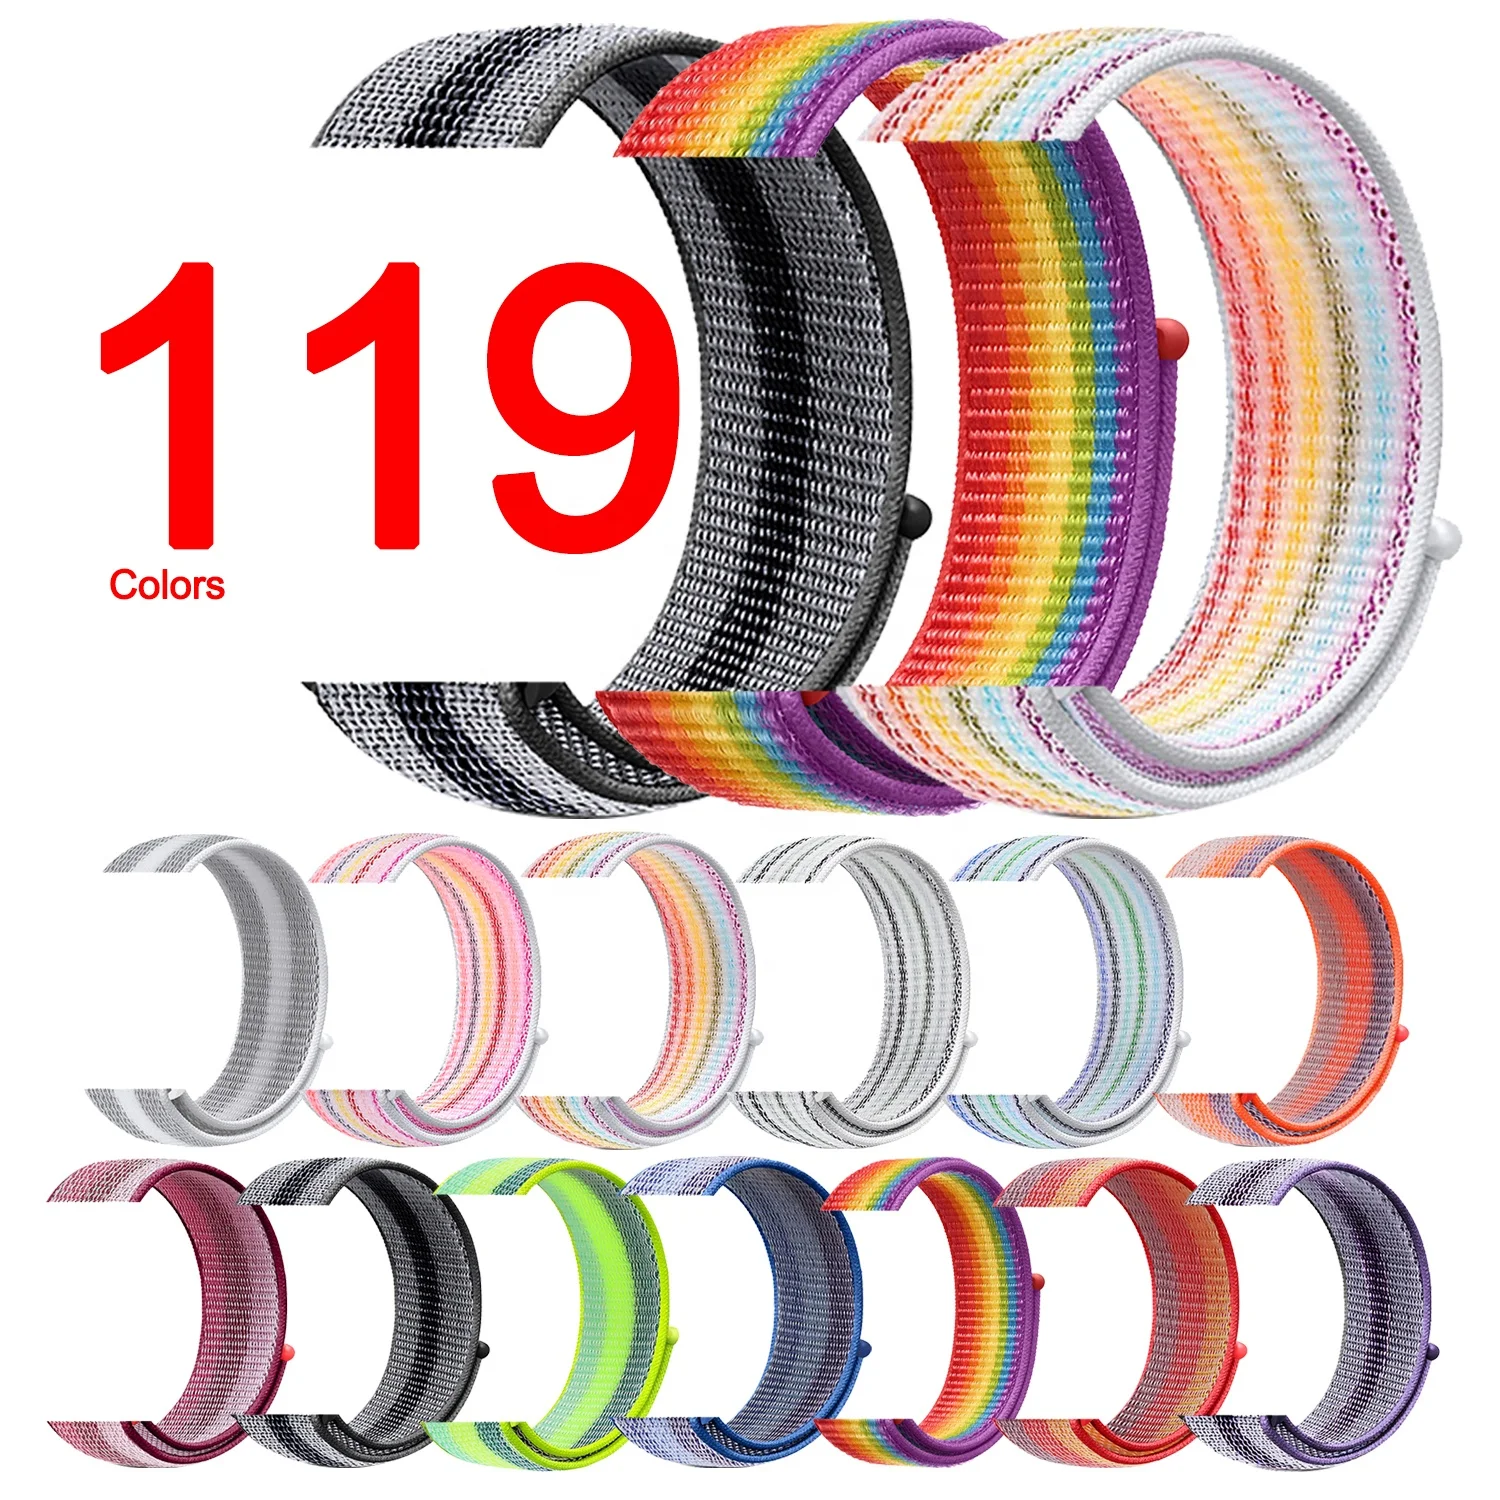 

ShanHai Nylon Sport Loop Band Replacement for Apple Watch Bands Series 3/4/5/6/SE/7 41mm 45mm Woven Wrist Strap For Apple iWatch, Multi-color optional or customized